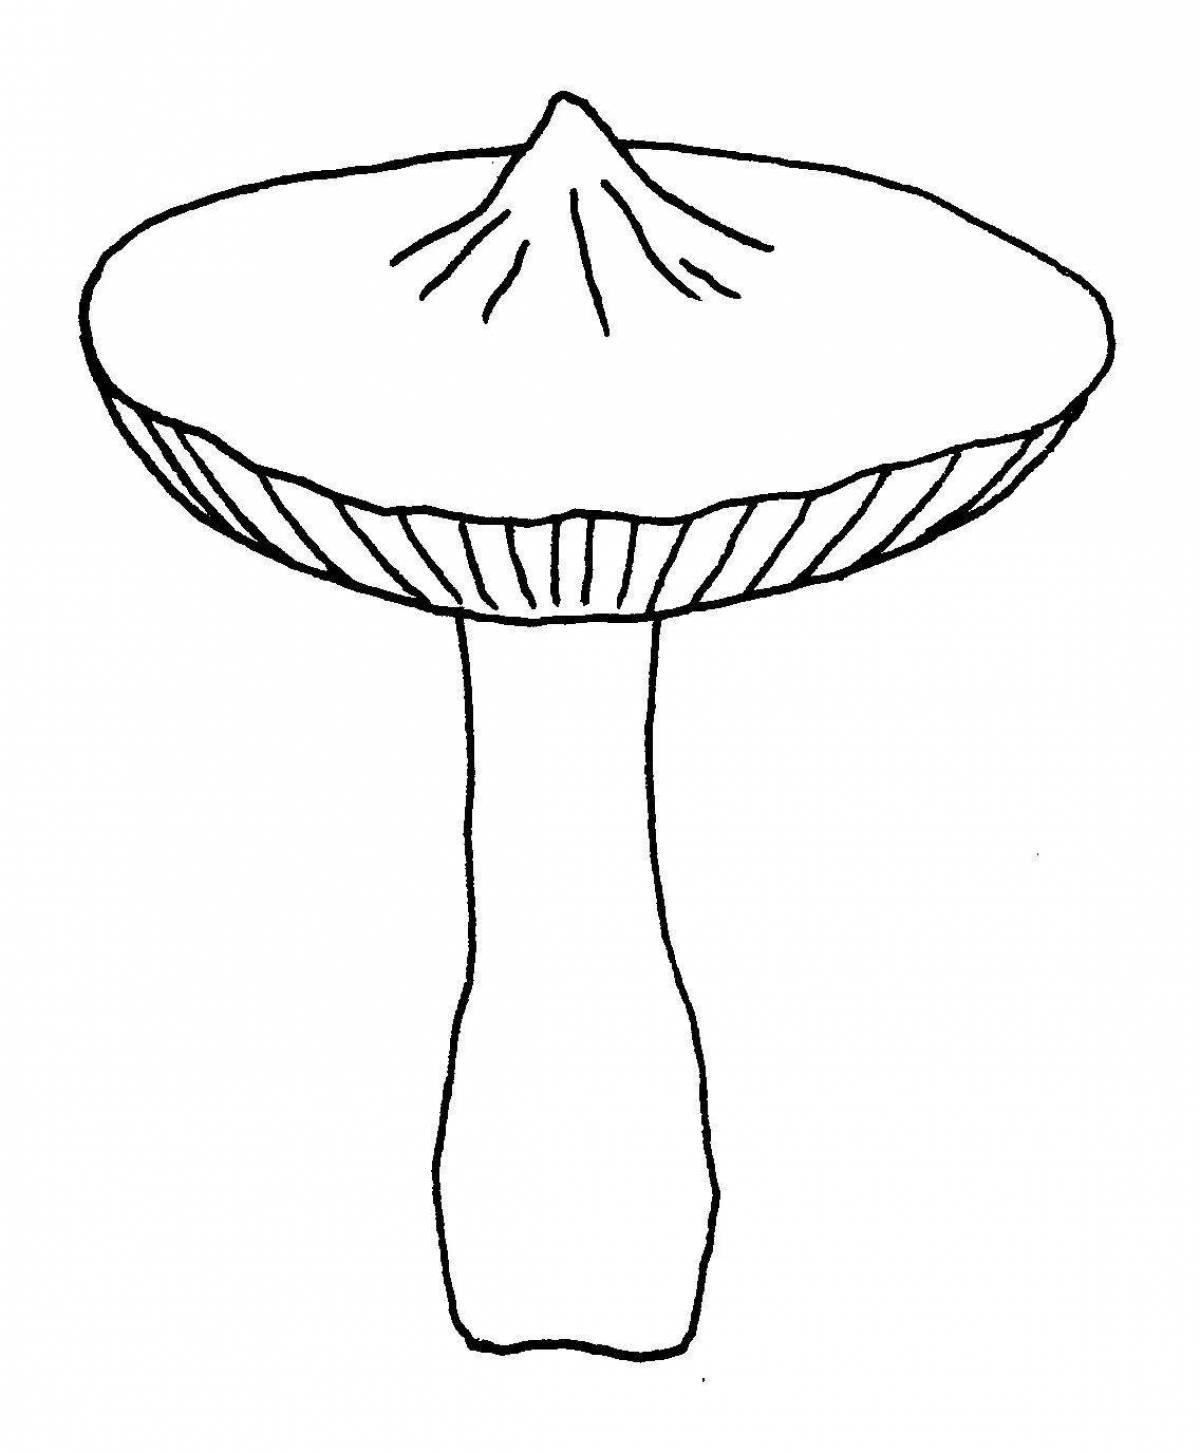 Intriguing toadstool coloring page